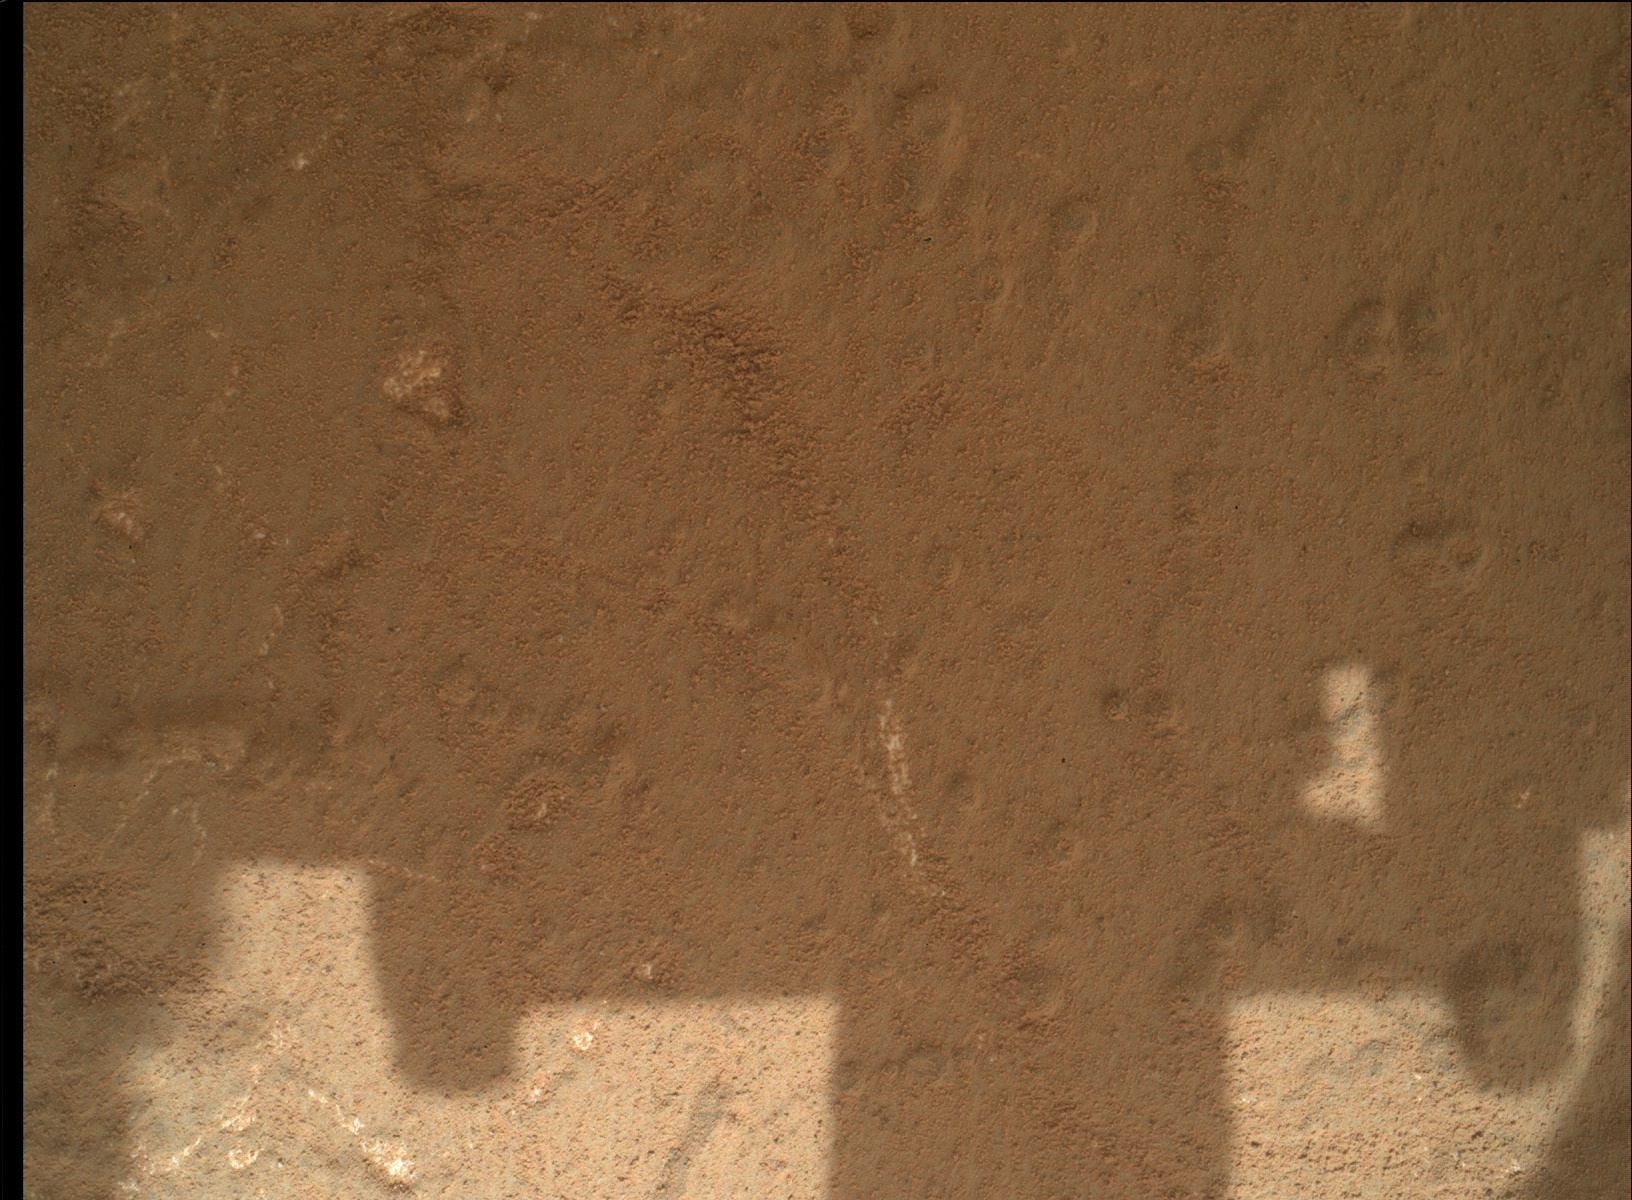 Nasa's Mars rover Curiosity acquired this image using its Mars Hand Lens Imager (MAHLI) on Sol 178